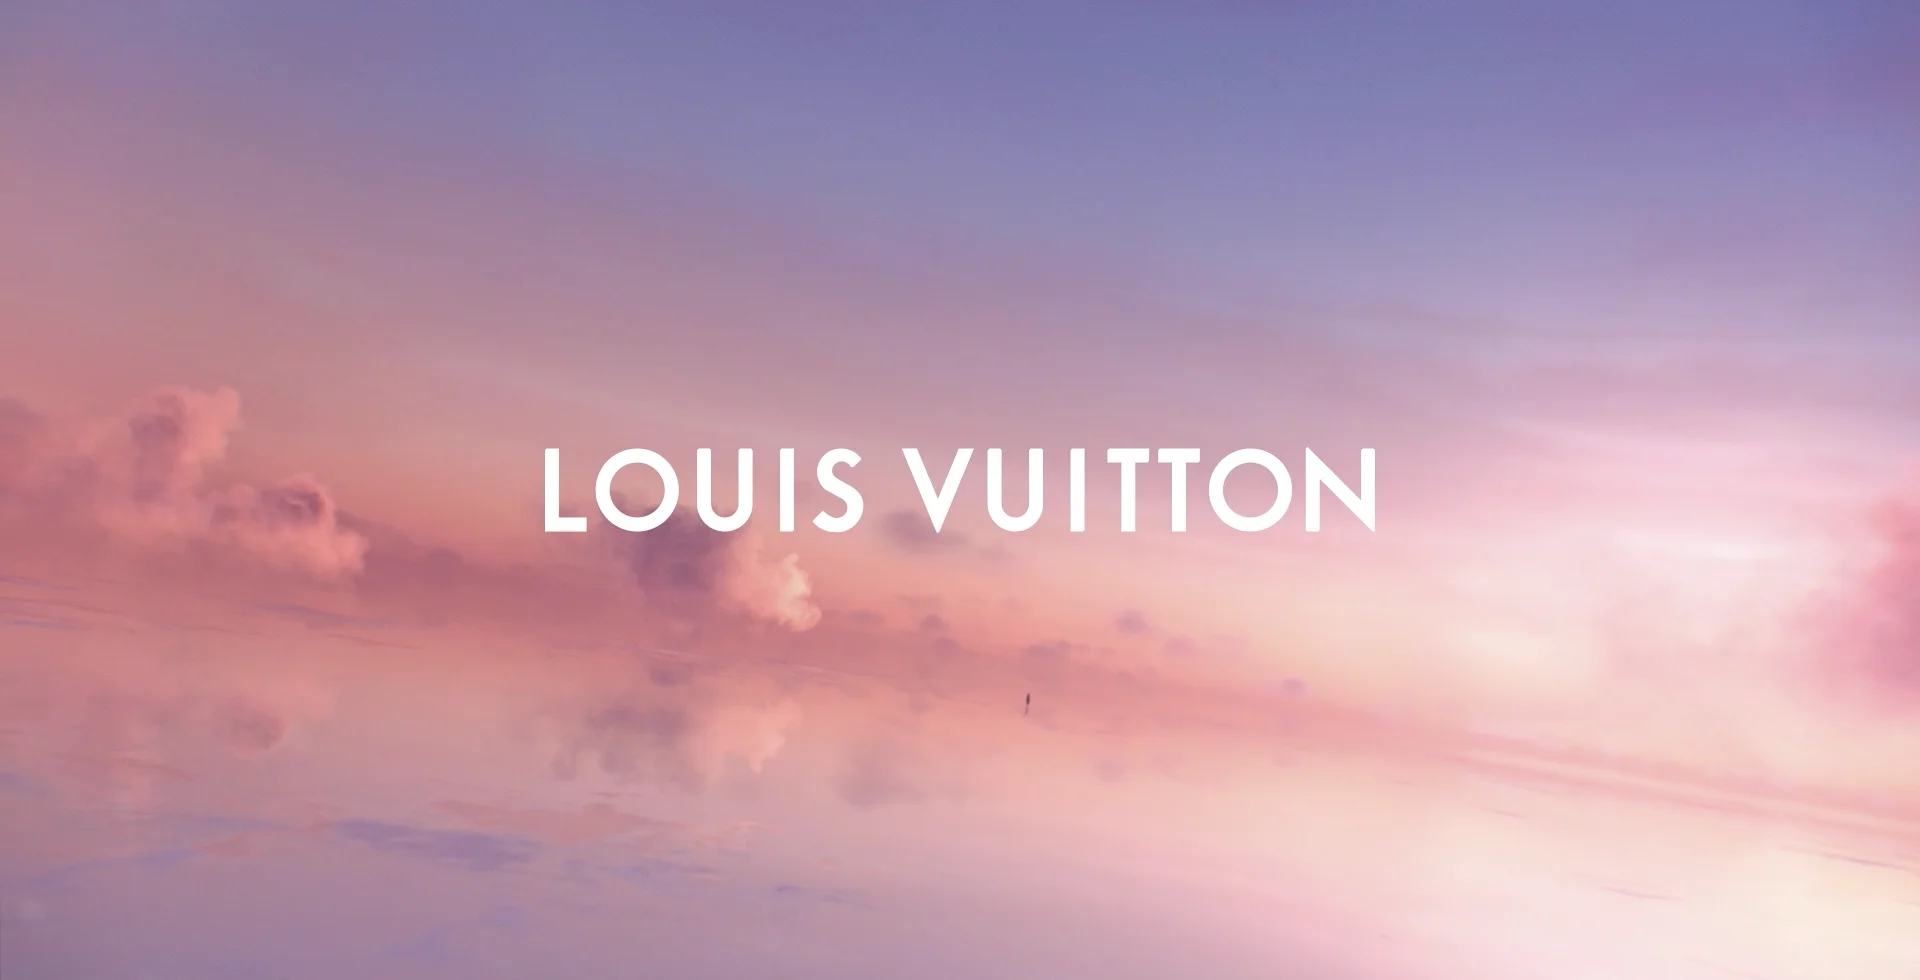 she has a thing for pink @louisvuitton